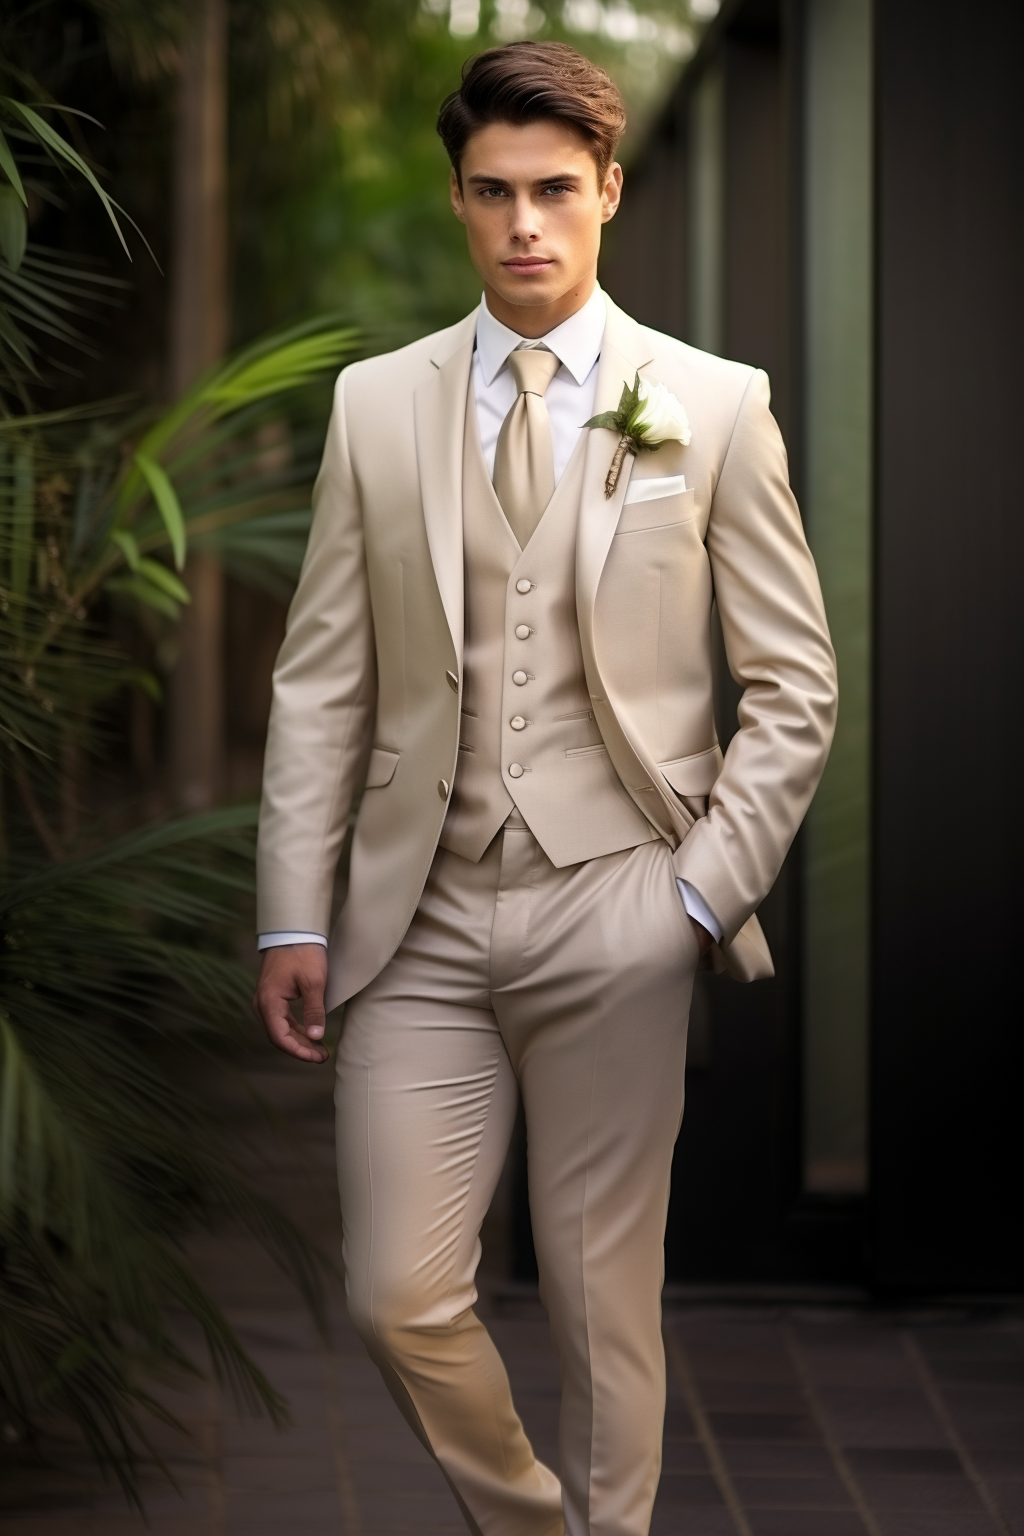 Chic Champagne Men's Three-Piece Suit - Sophisticated Business and Formal Attire